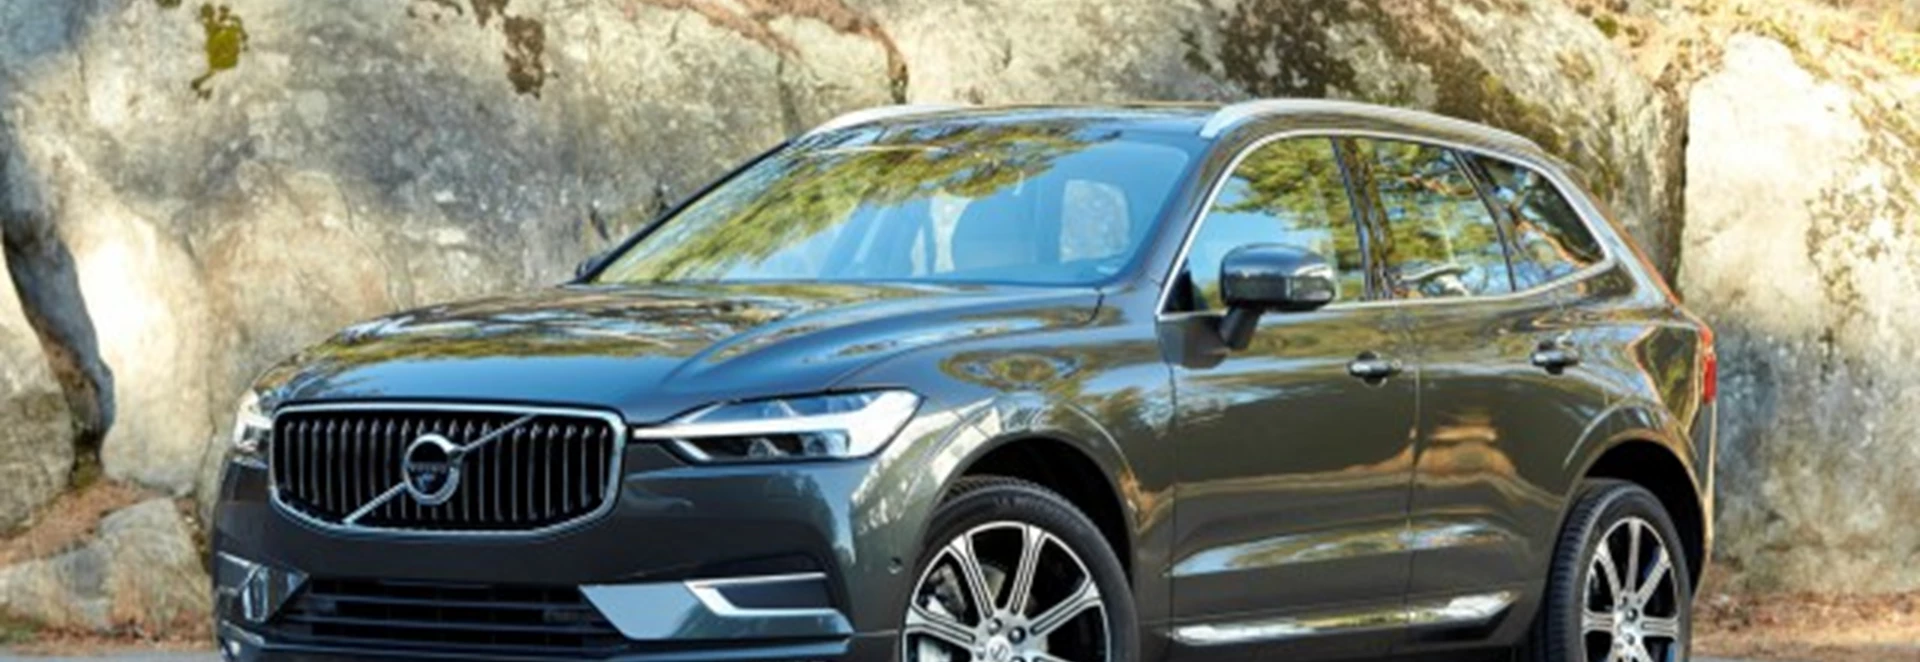 2017 Volvo XC60 mid-size SUV unmasked prior to summer launch